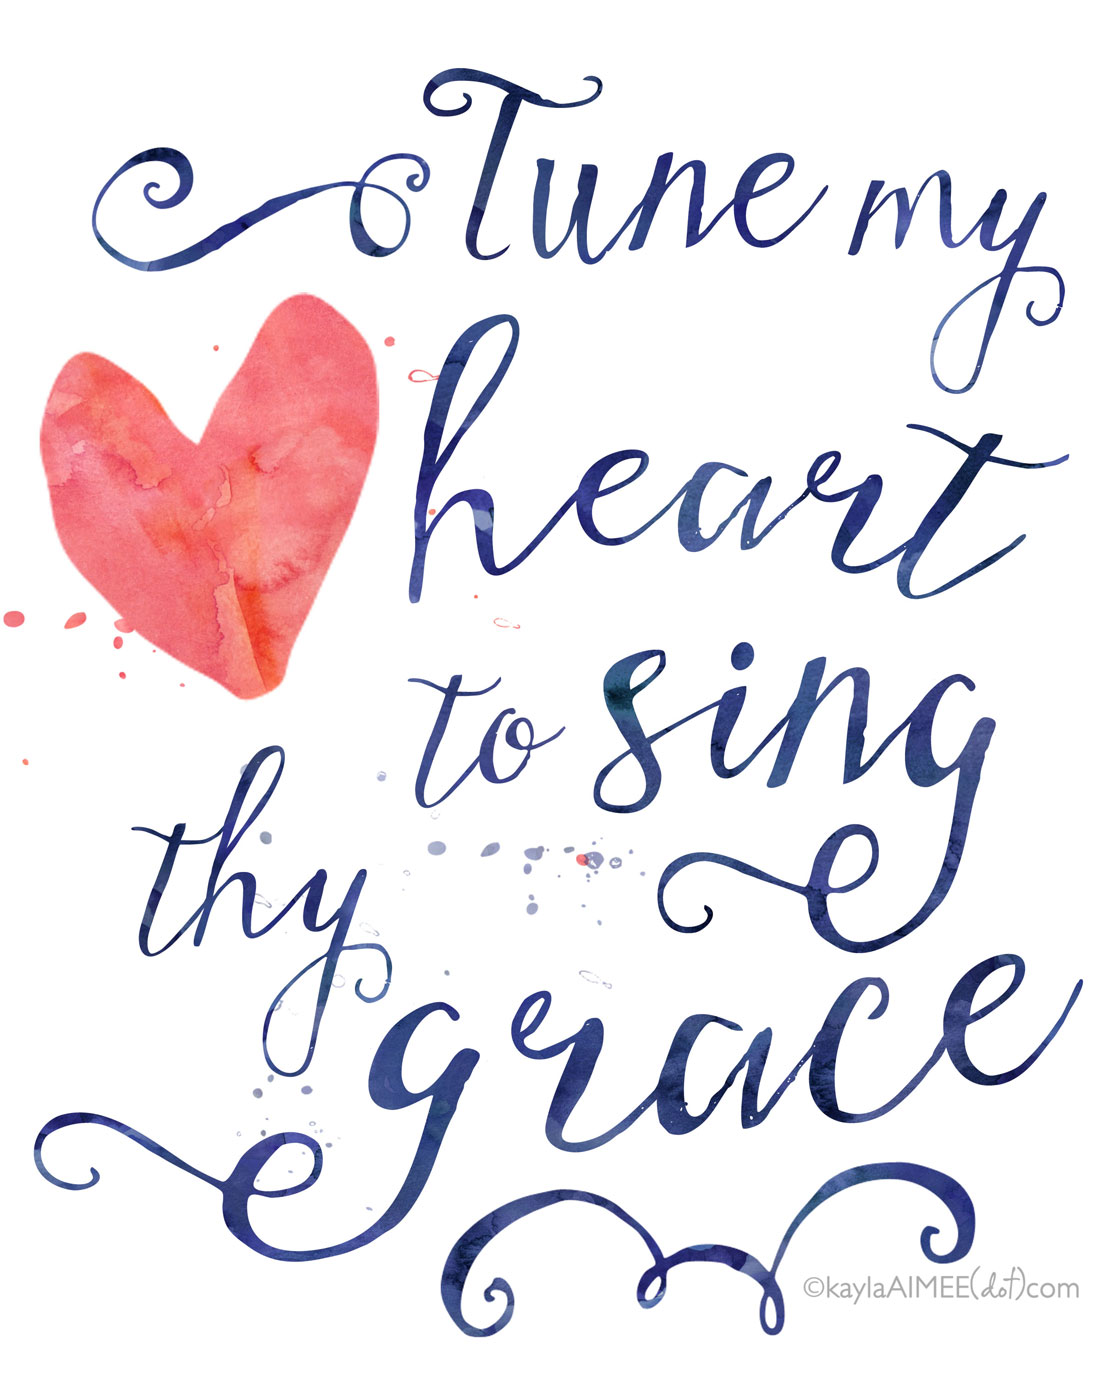 Free Printable Quote of my favorite hymn - Tune My Heart To Sing Thy Grace